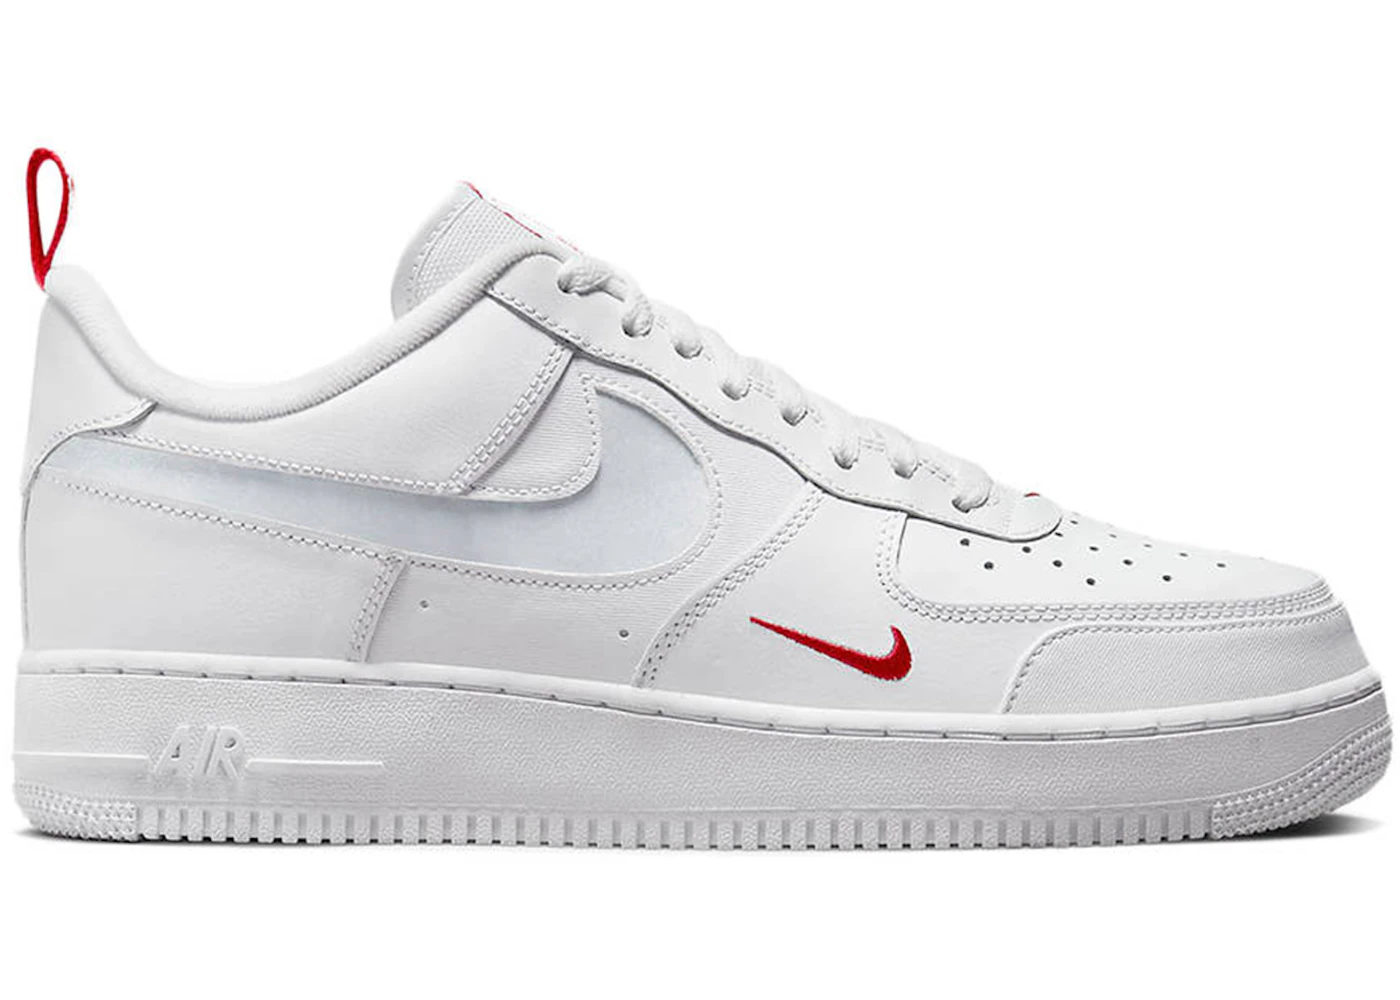 Nike Air Force 1 Low Cut Out Swoosh White University Red Metallic